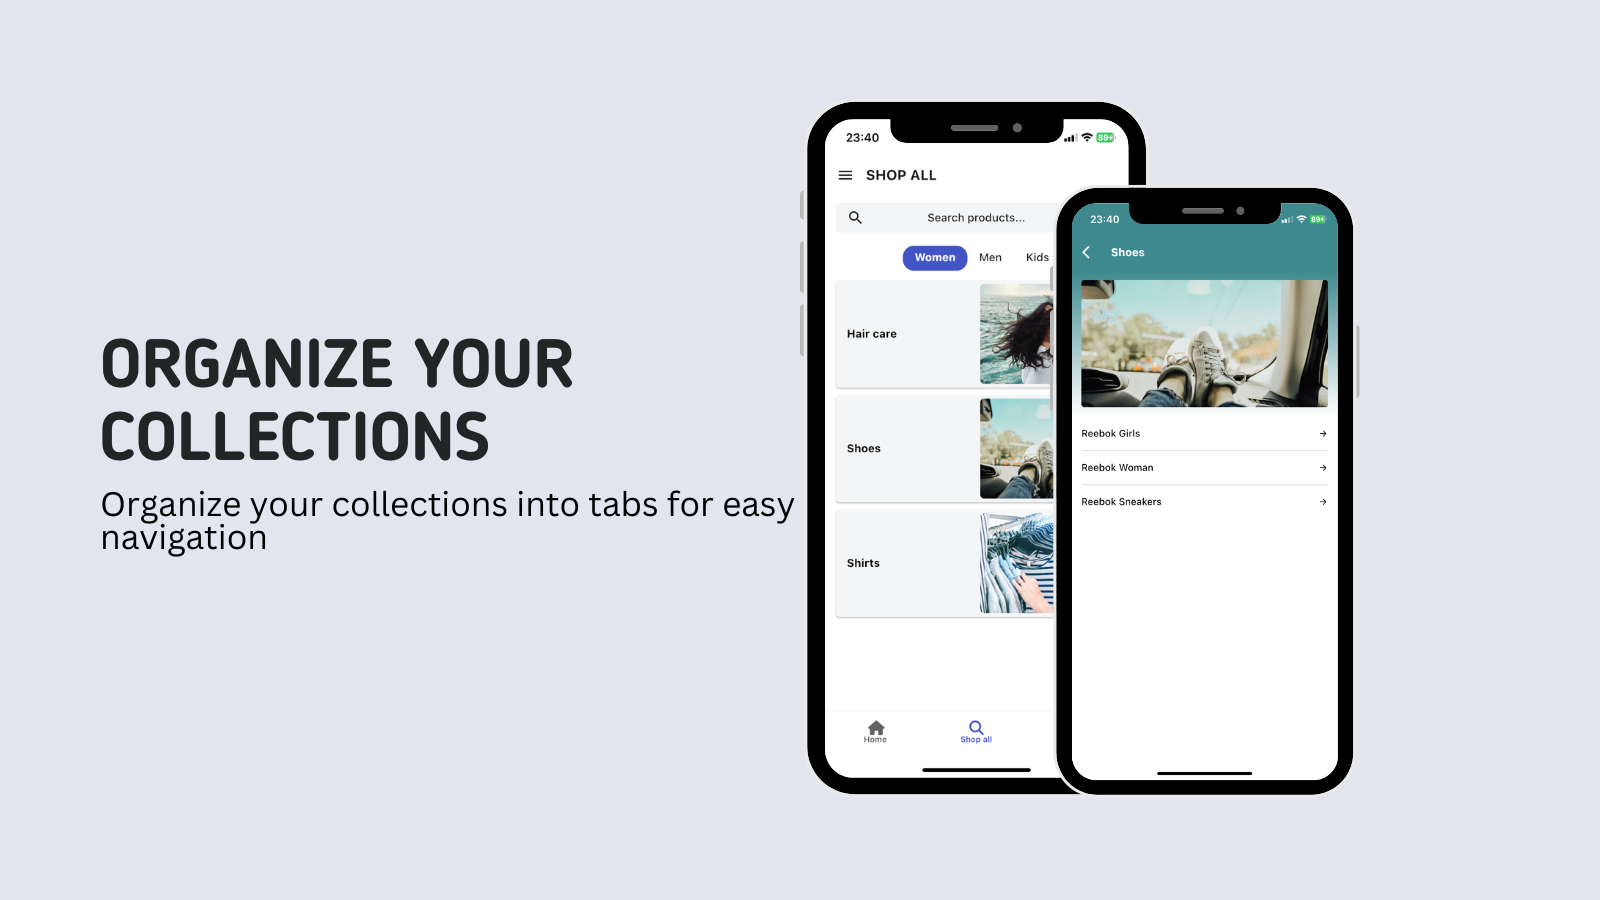 Organize your collections into tabs for easy navigation